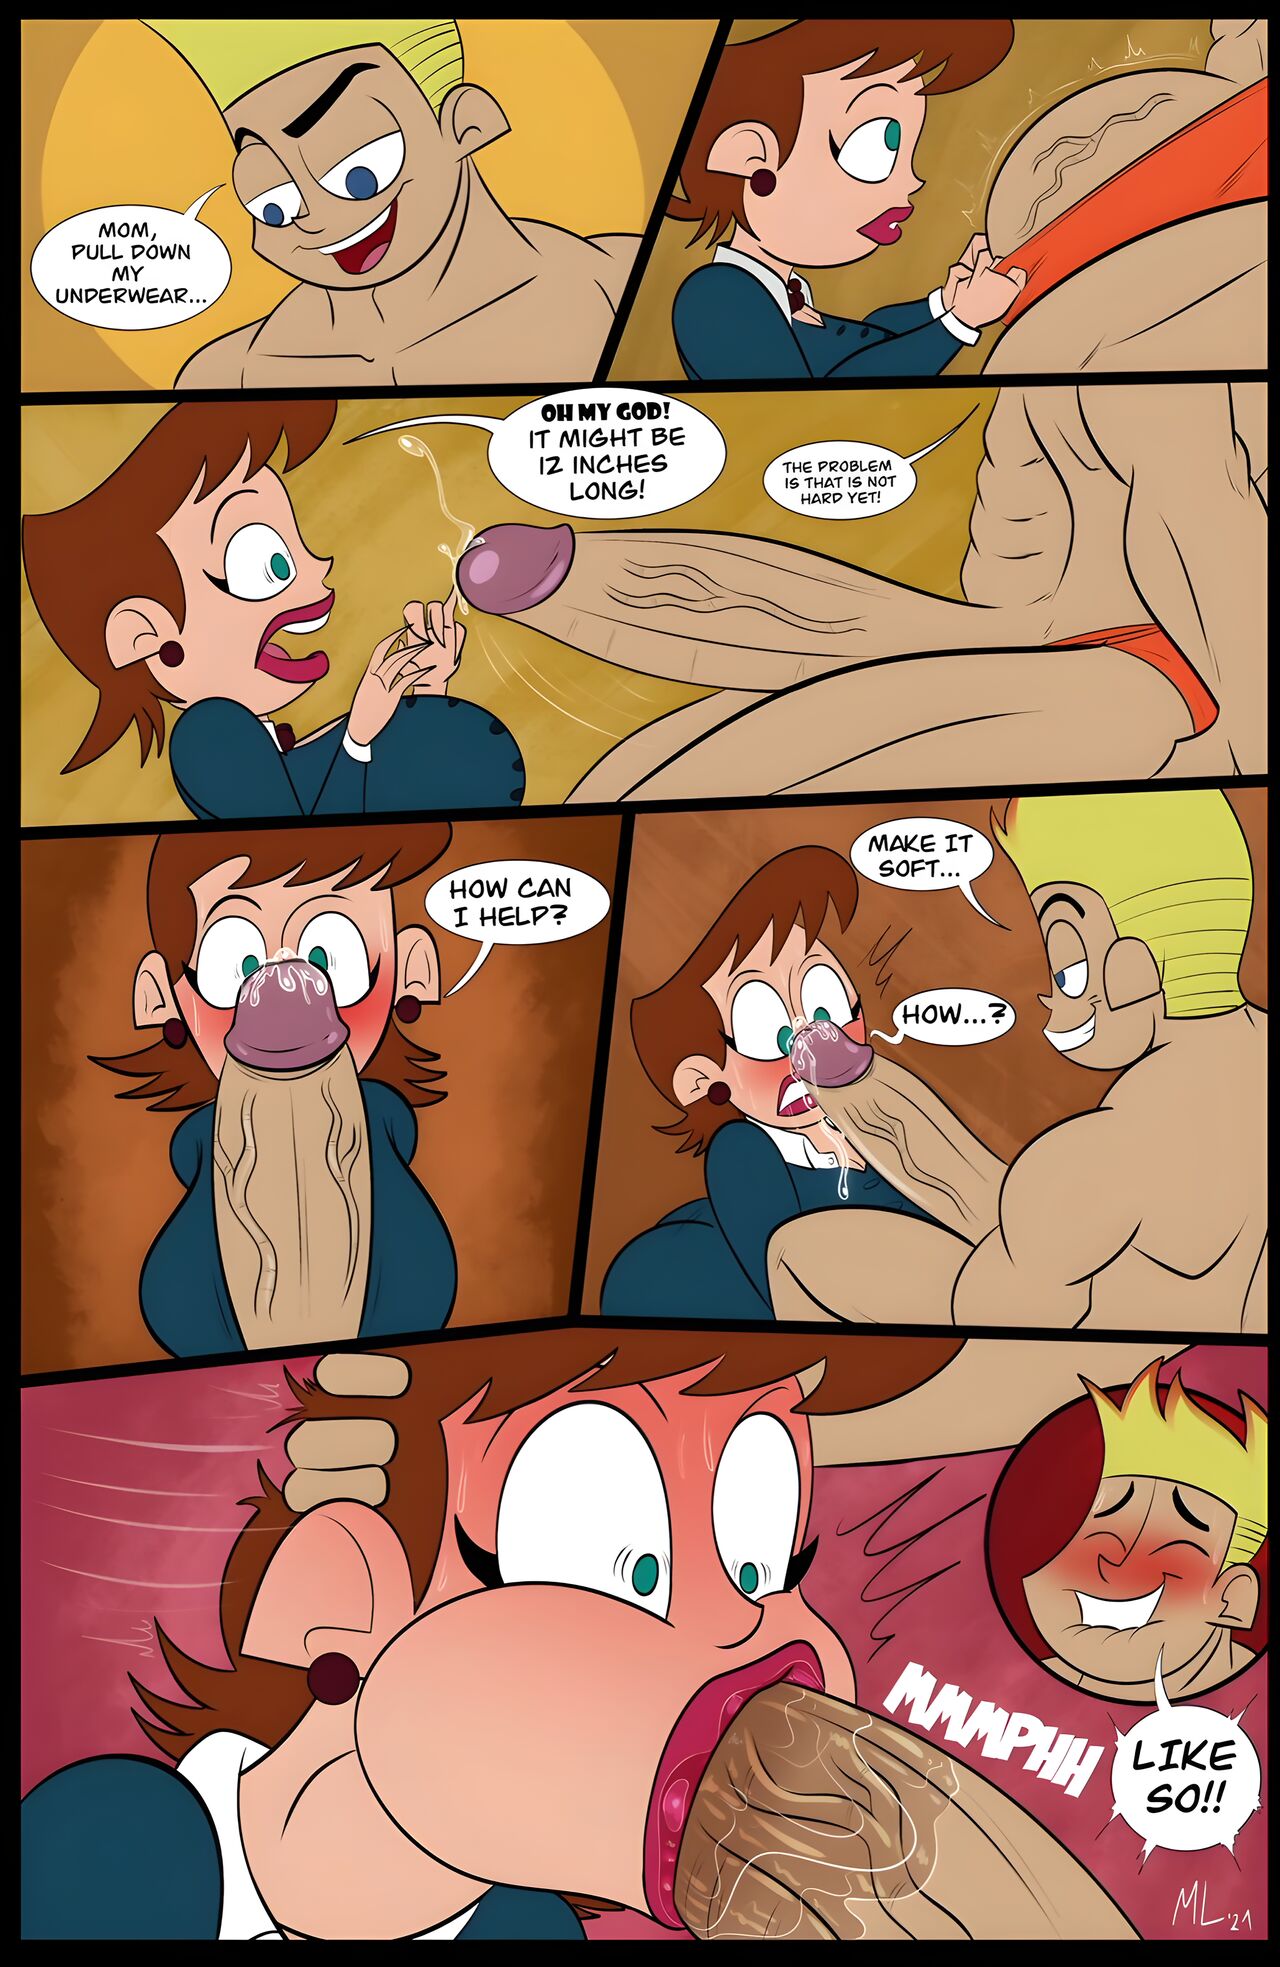 Johnny Test Tentacle Porn - Johnny Test and the Puberty Potion - Ameizing Lewds - KingComiX.com